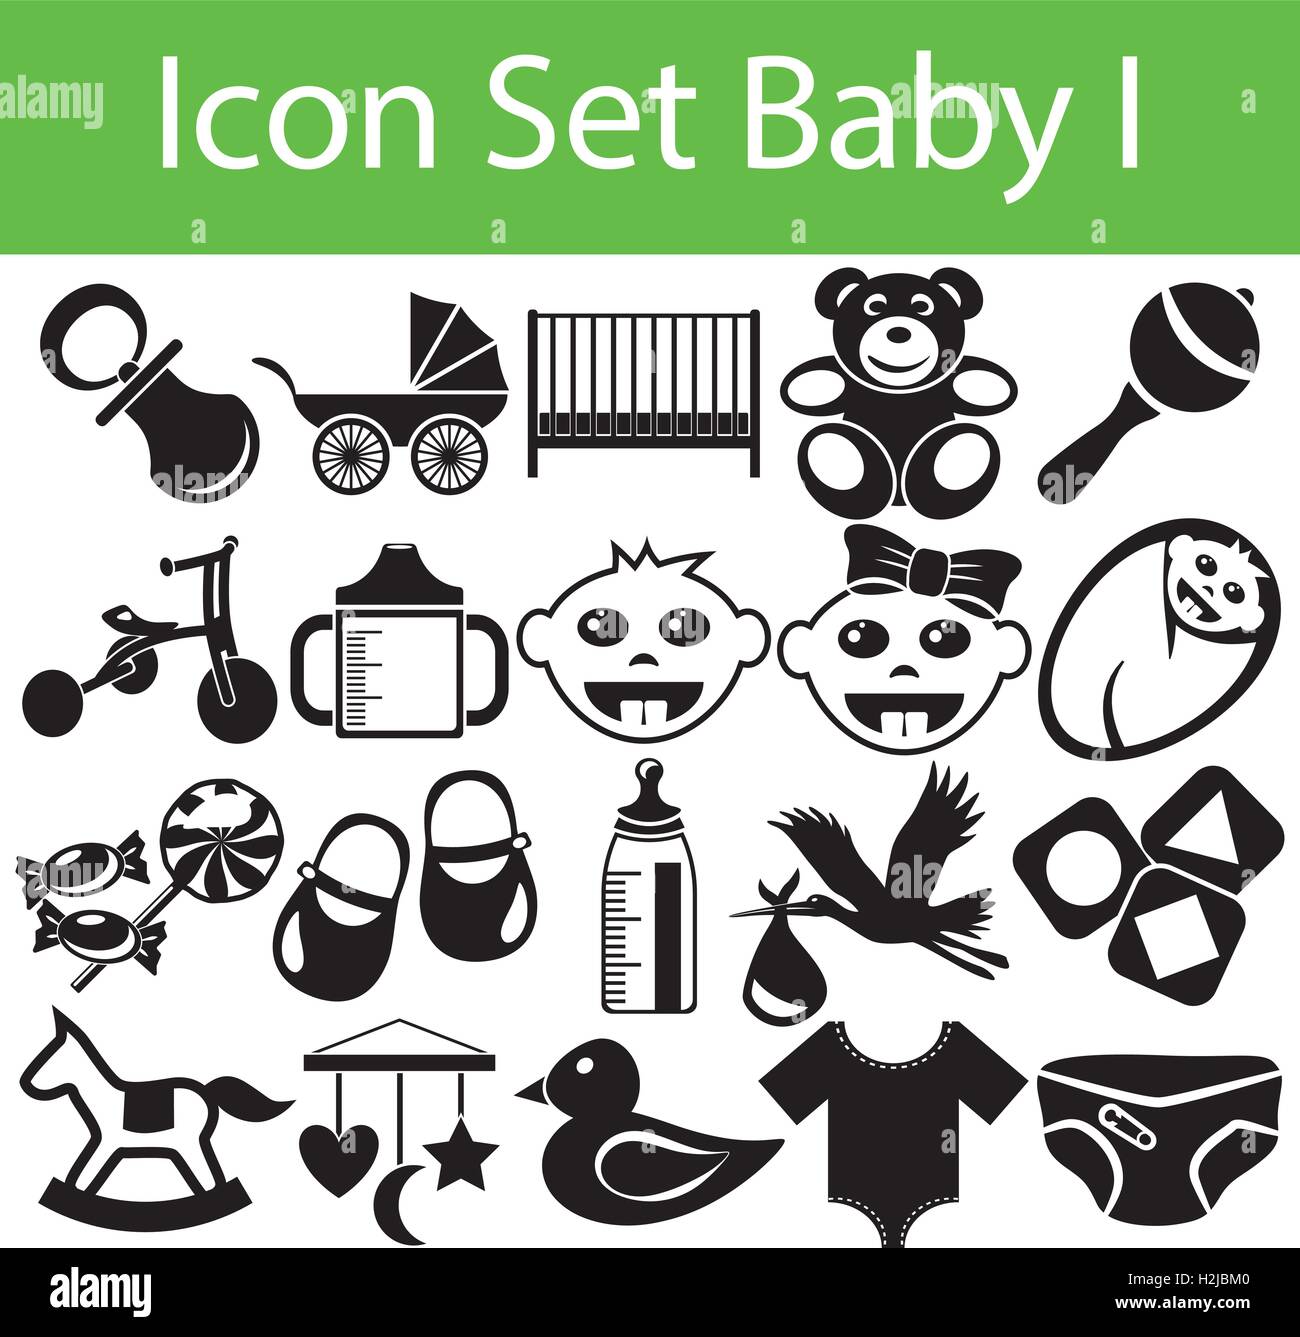 Icon Set Baby with 20 icons for the creative use in graphic design Stock Vector